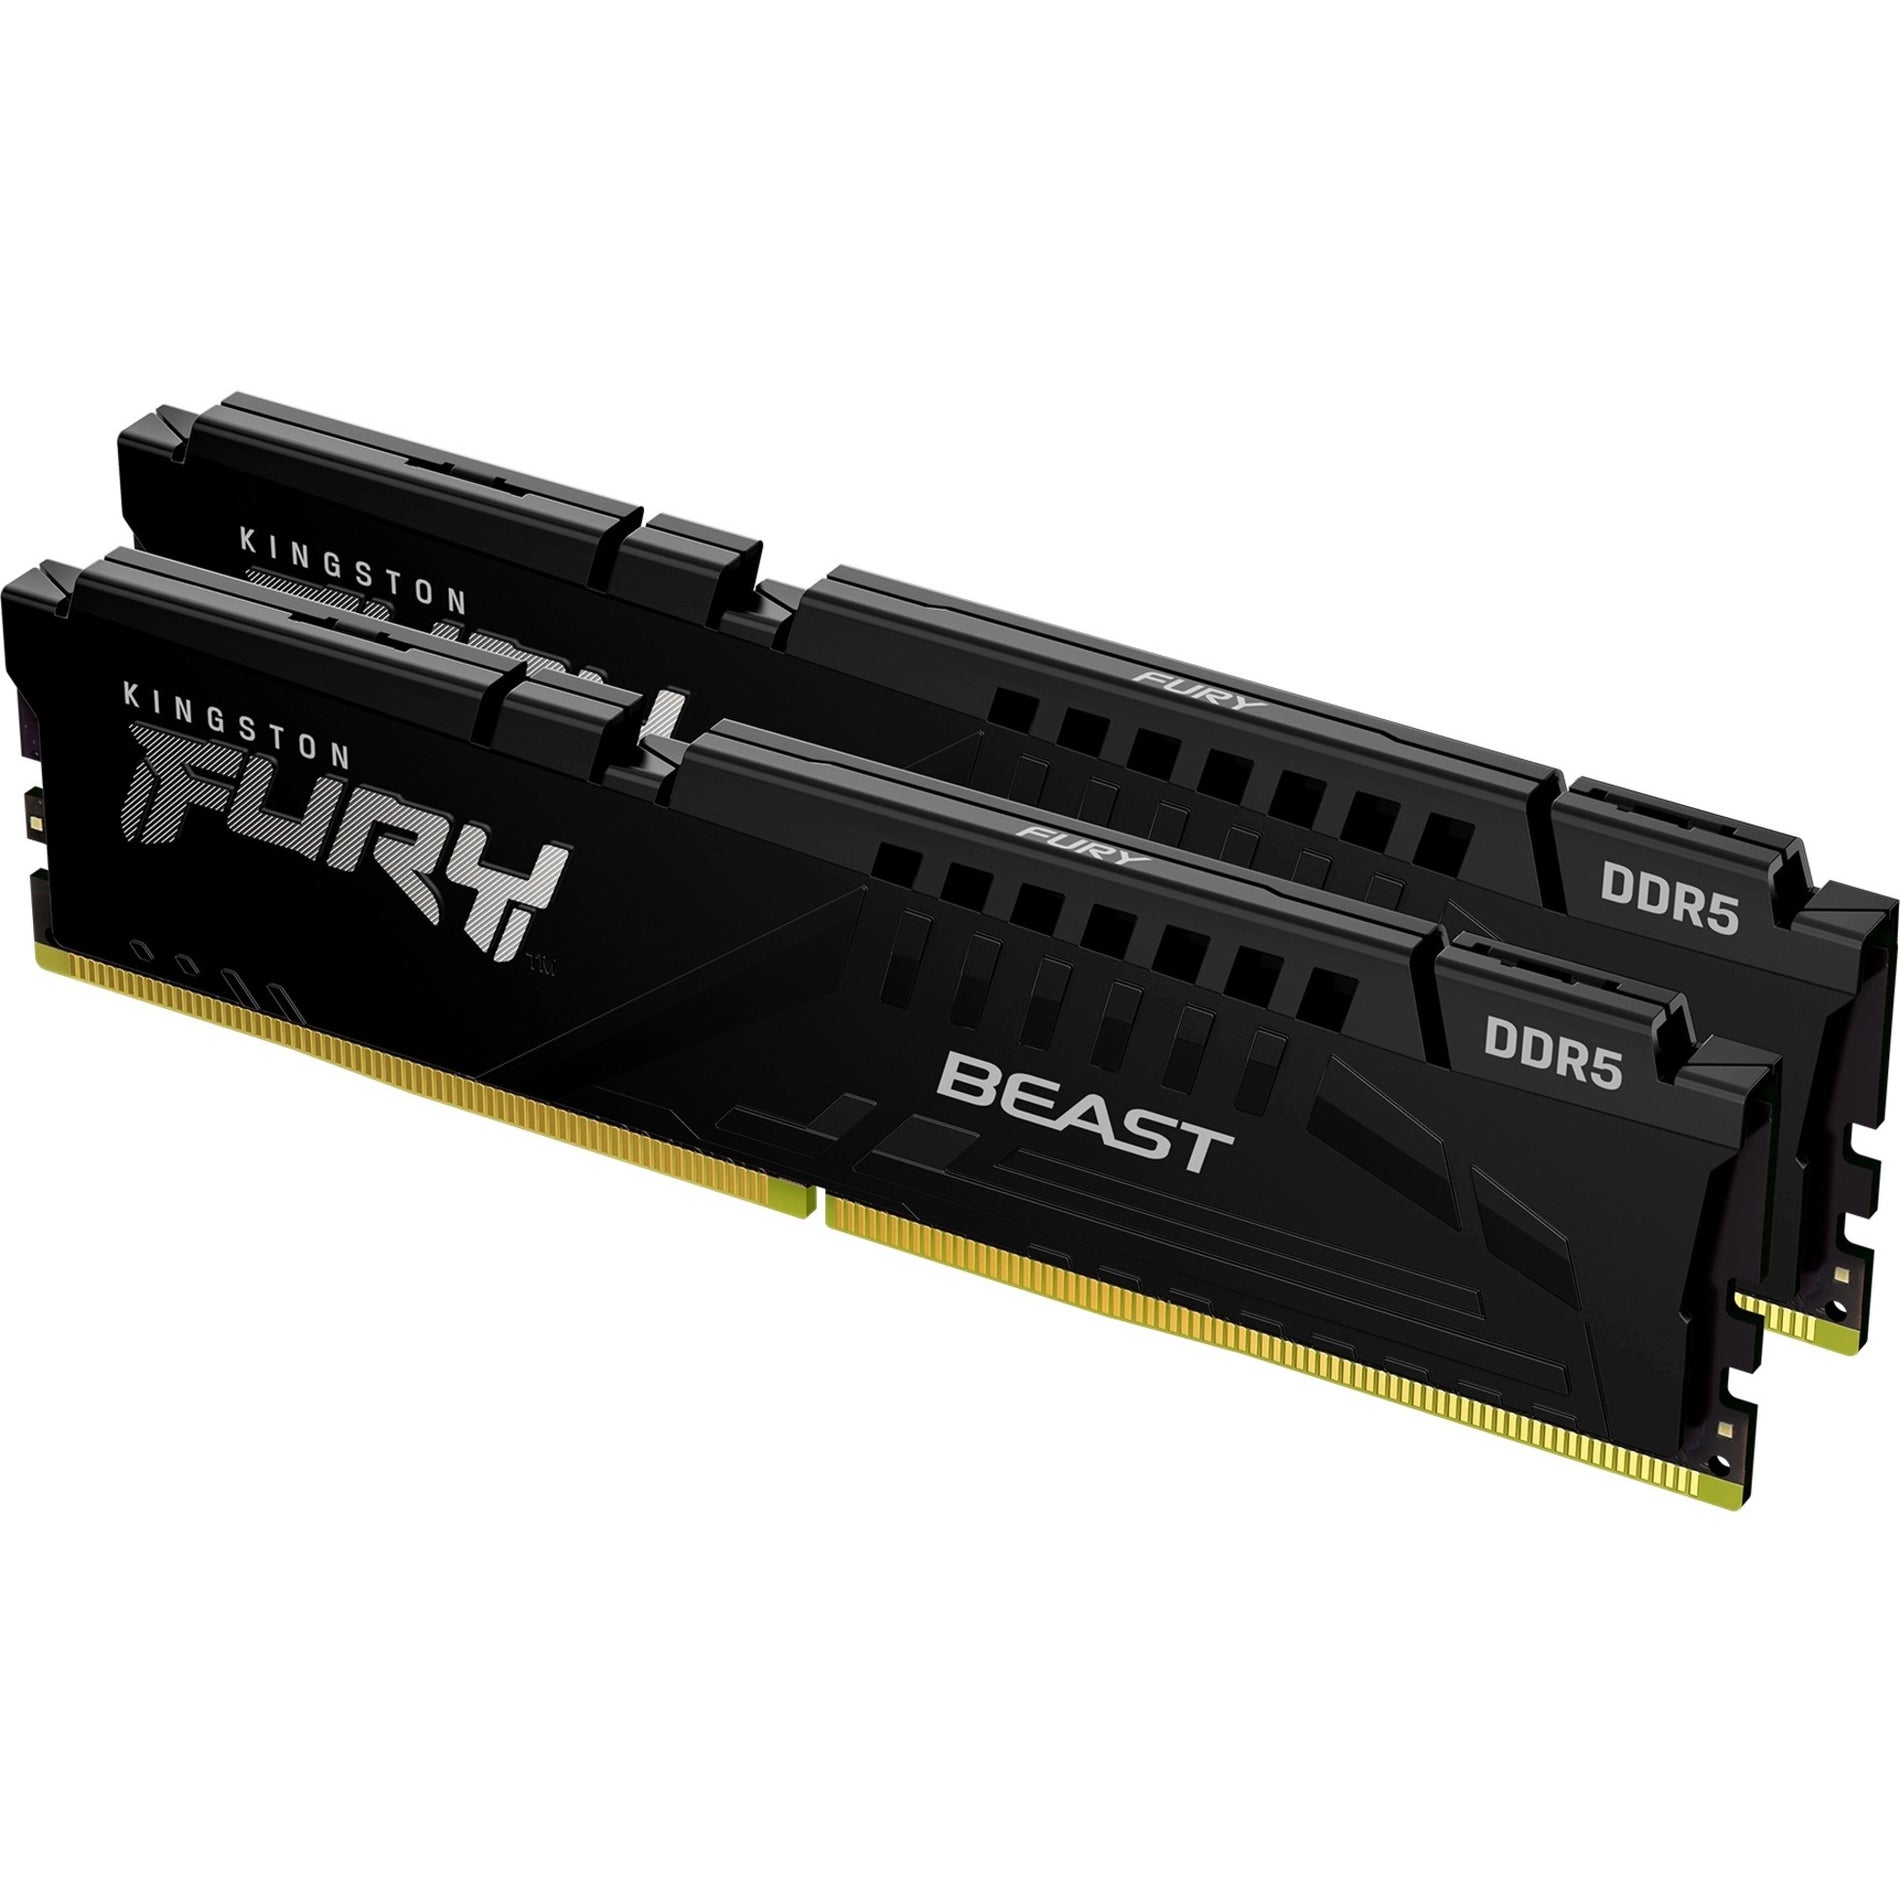 Kingston KF548C38BBK2-16 FURY Beast 16GB DDR5-4800MTS CL38 DIMM (KIT OF 2), High-Speed RAM for Gaming and Performance